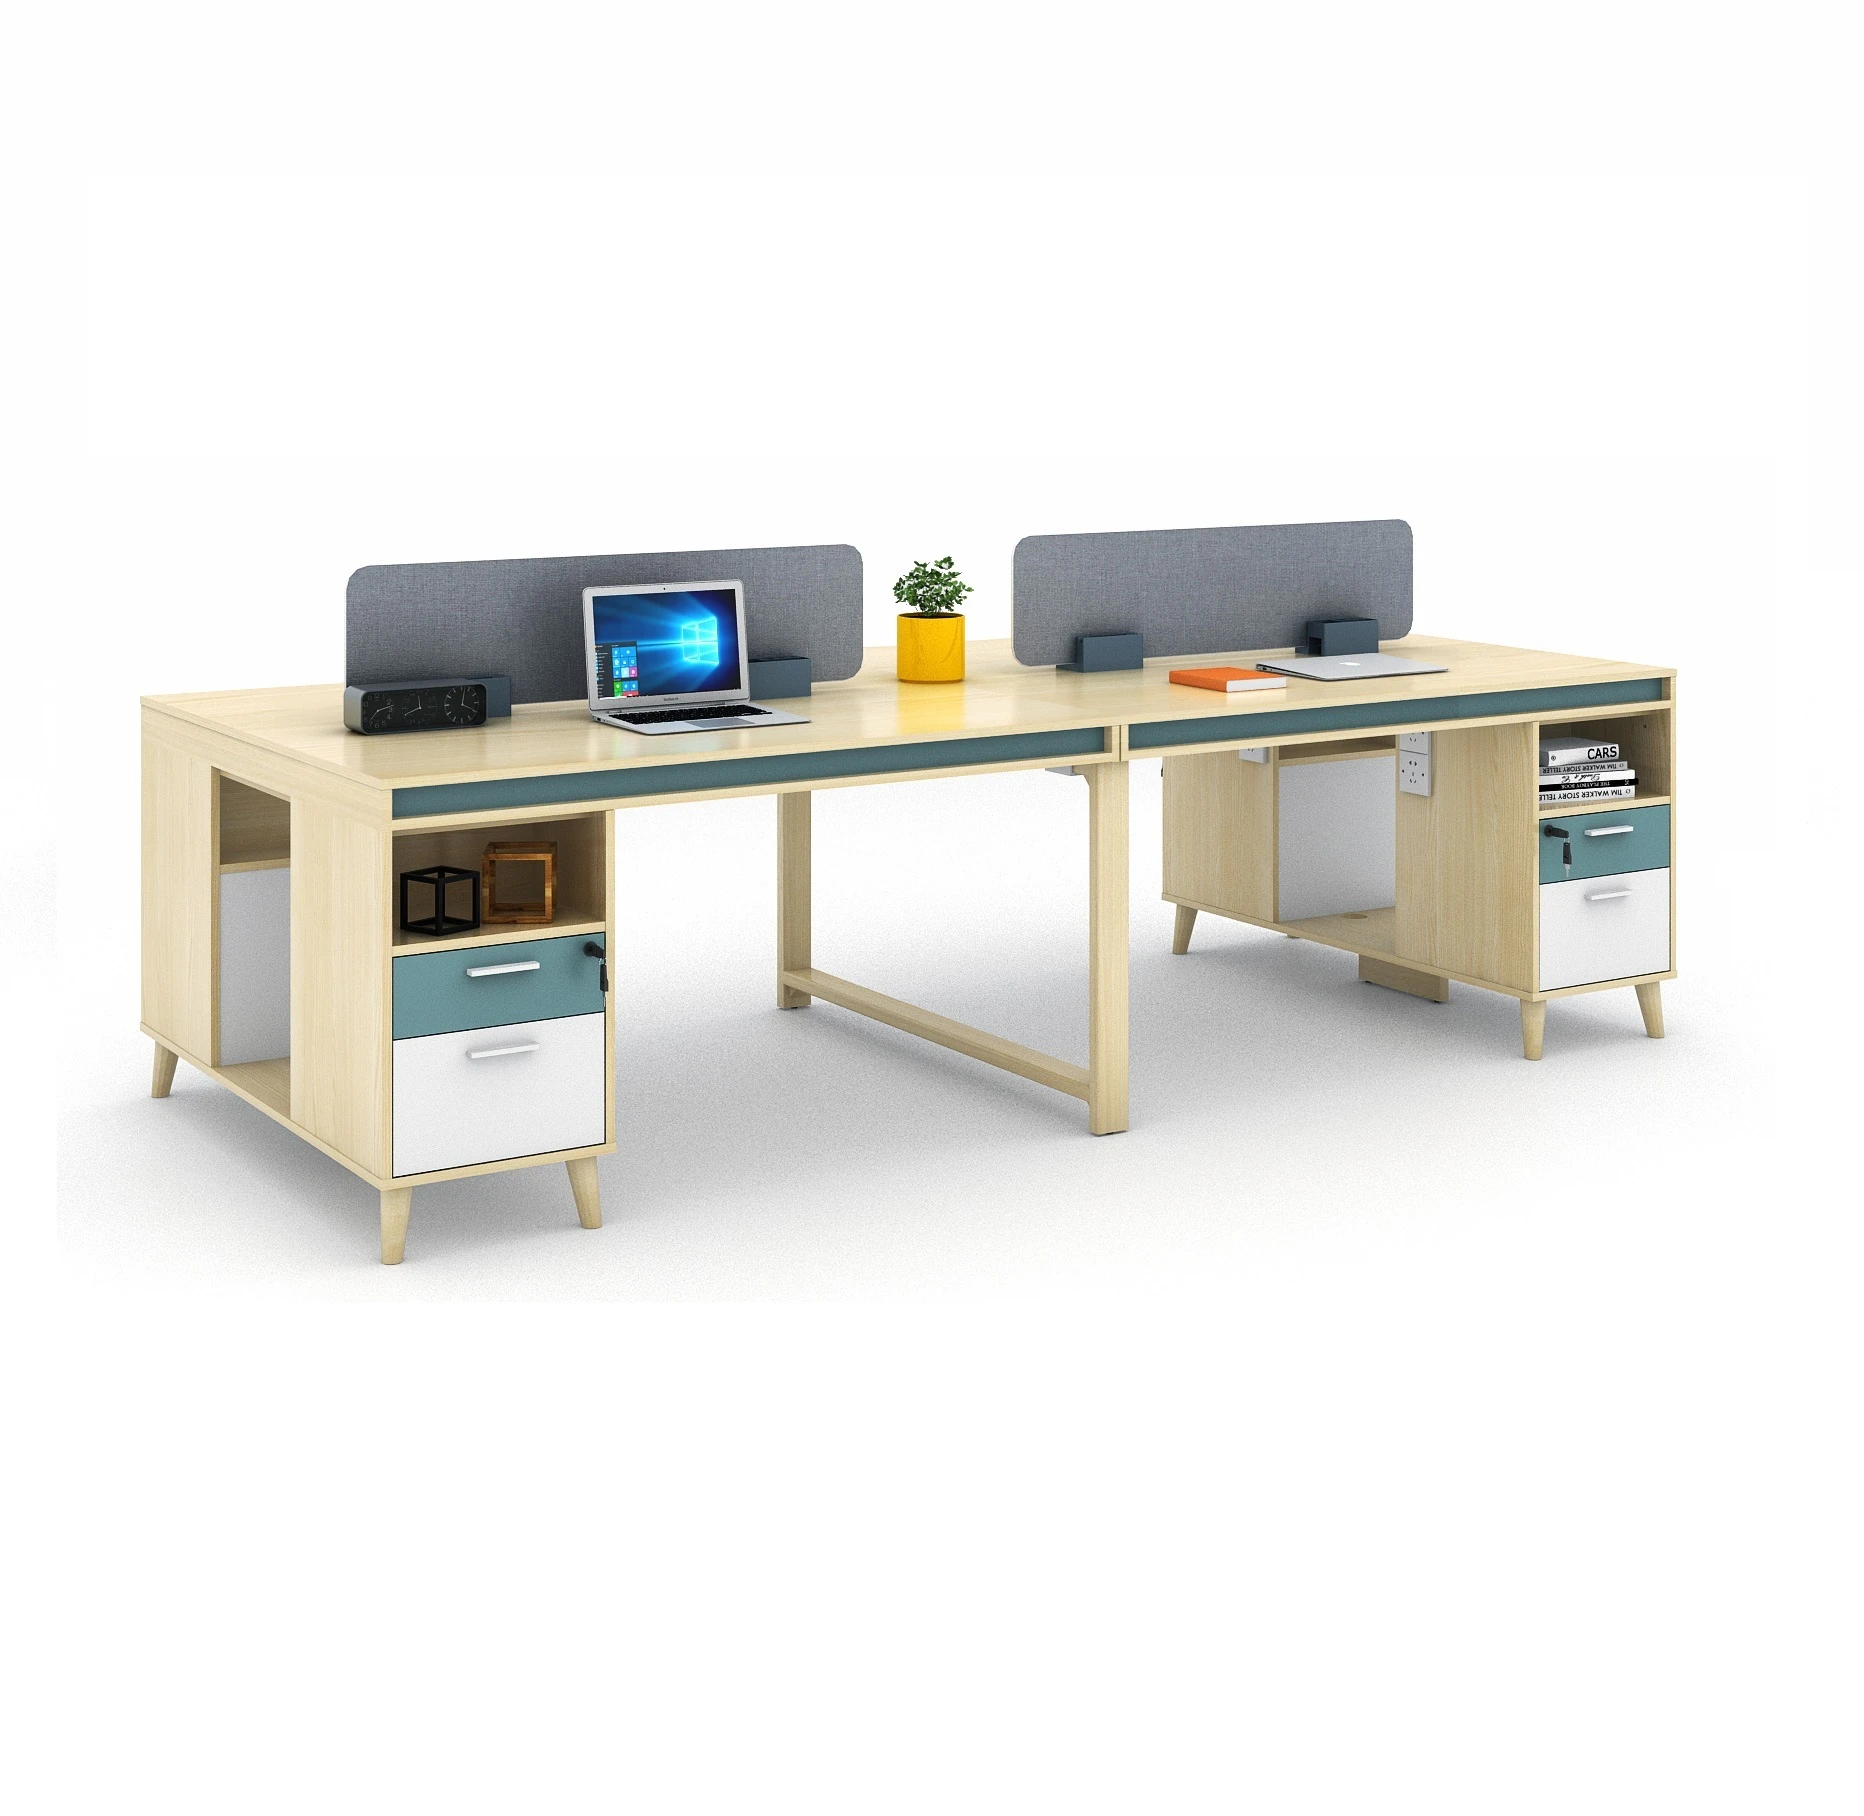 Dious luxury sit stand desk portable workstation furniture monitoring workstation